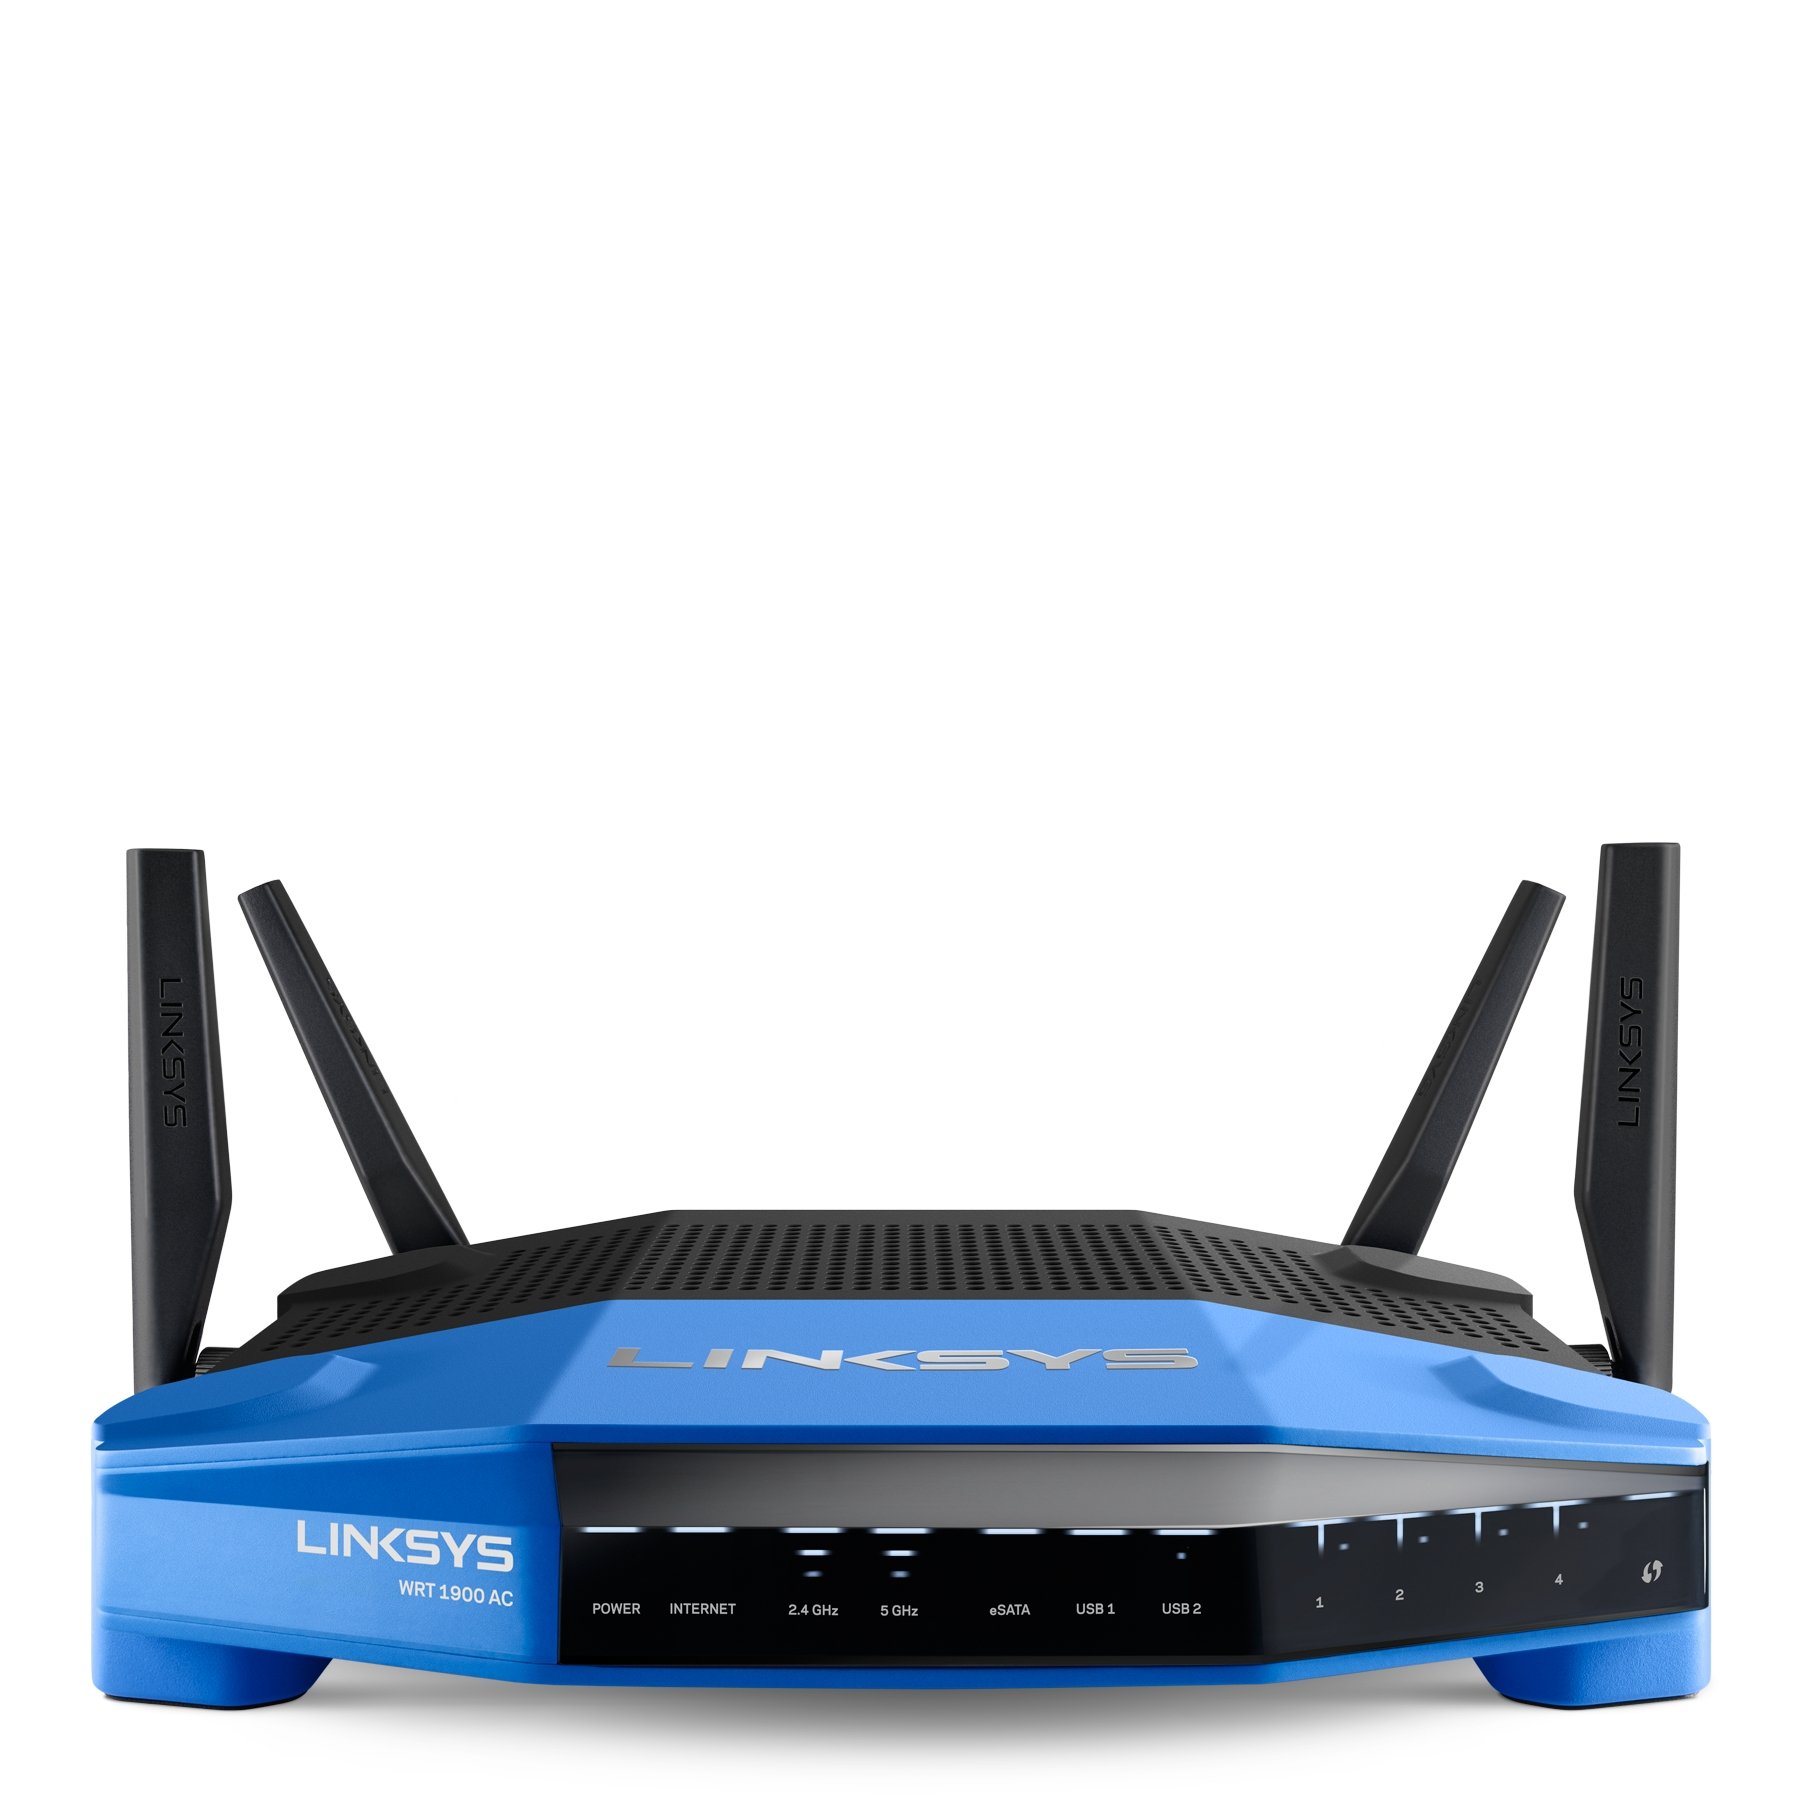 Router with a red 'X' symbol